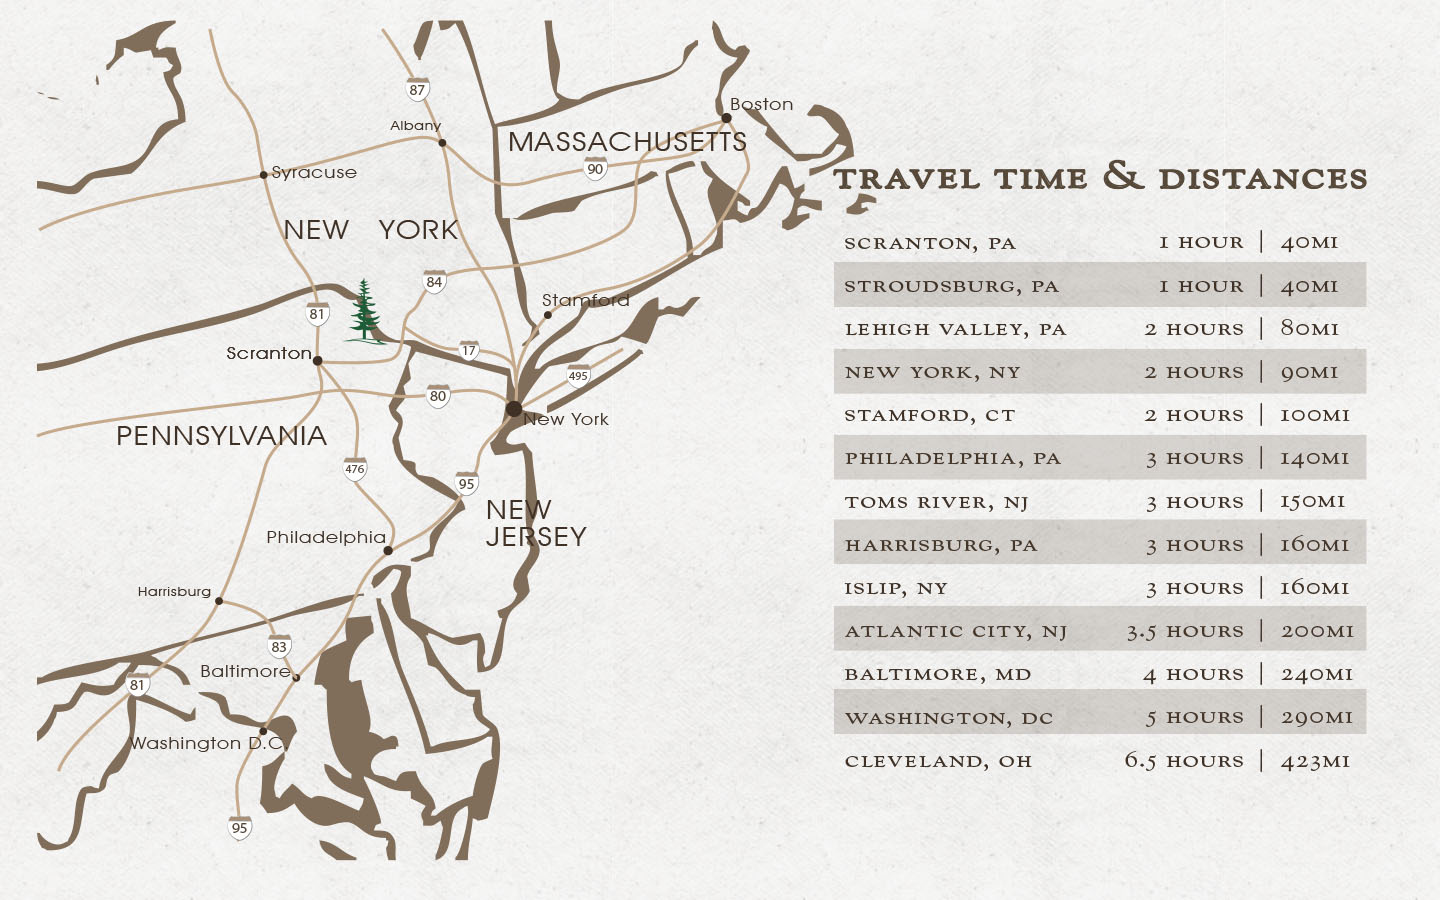 Travel times and distances chart, plus highway map.